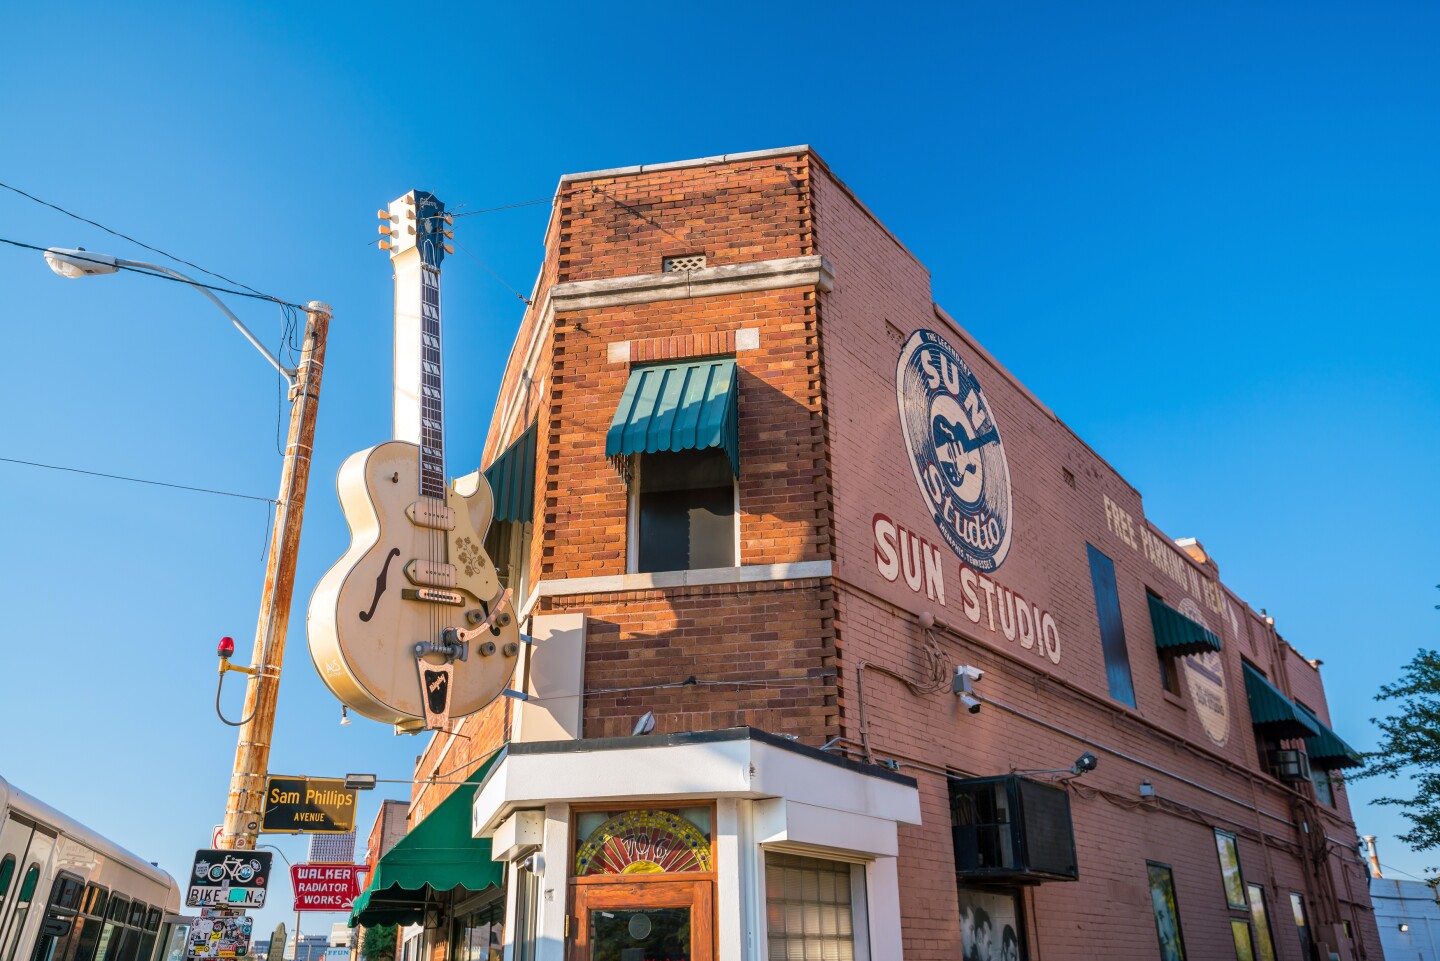 <a>Sun Studio in Memphis was the site of the famous Million Dollar recording session that brought together Elvis Presley, Jerry Lee Lewis, Carl Perkins, and Johnny Cash.</a>